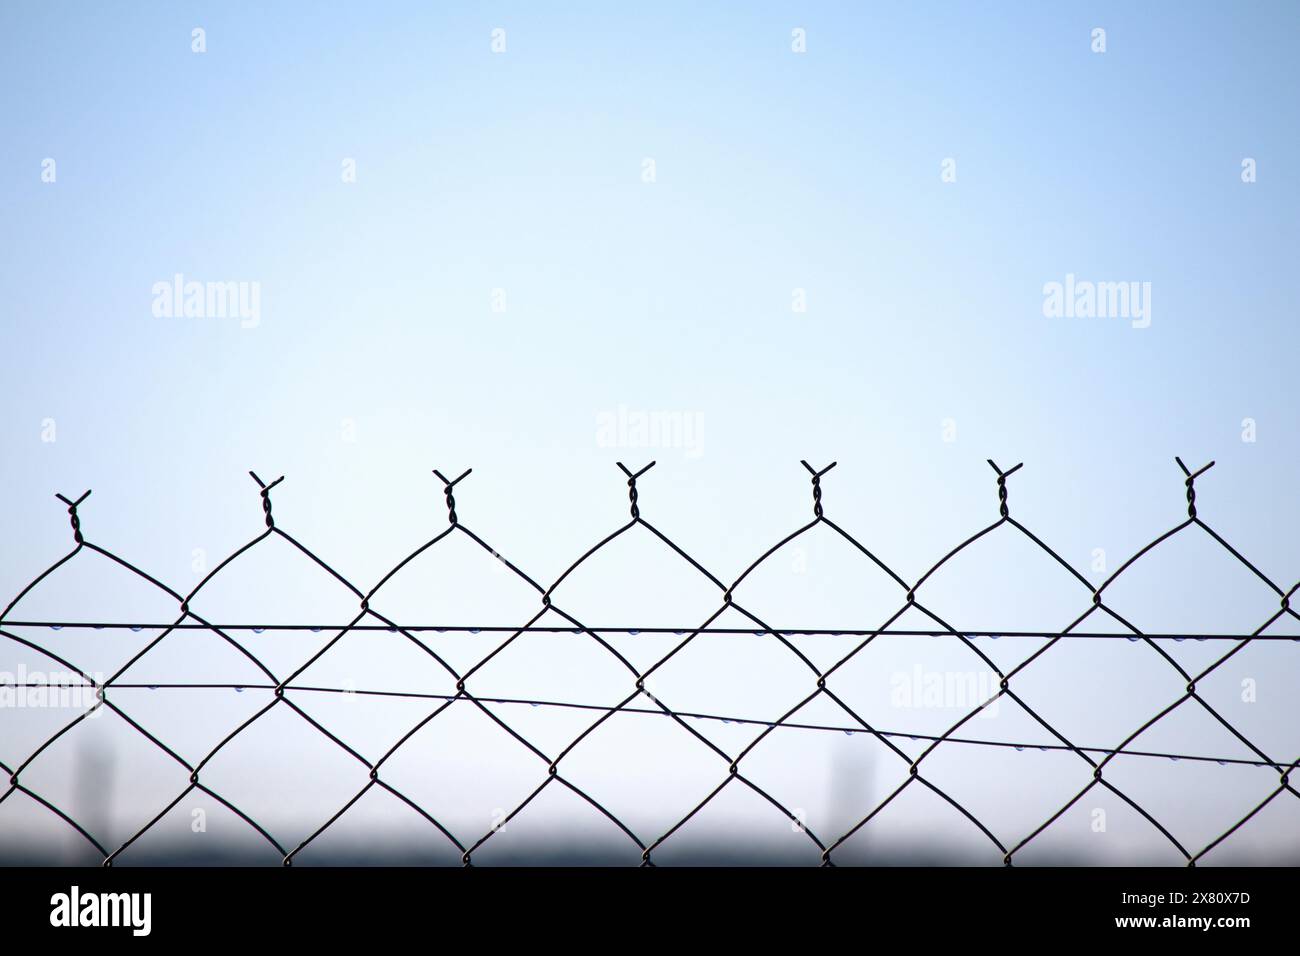 Stainless steel fencing wire. Garden wires are networks woven with steel cables. Terrace fence or railing isolated on white background. Safety. Stock Photo